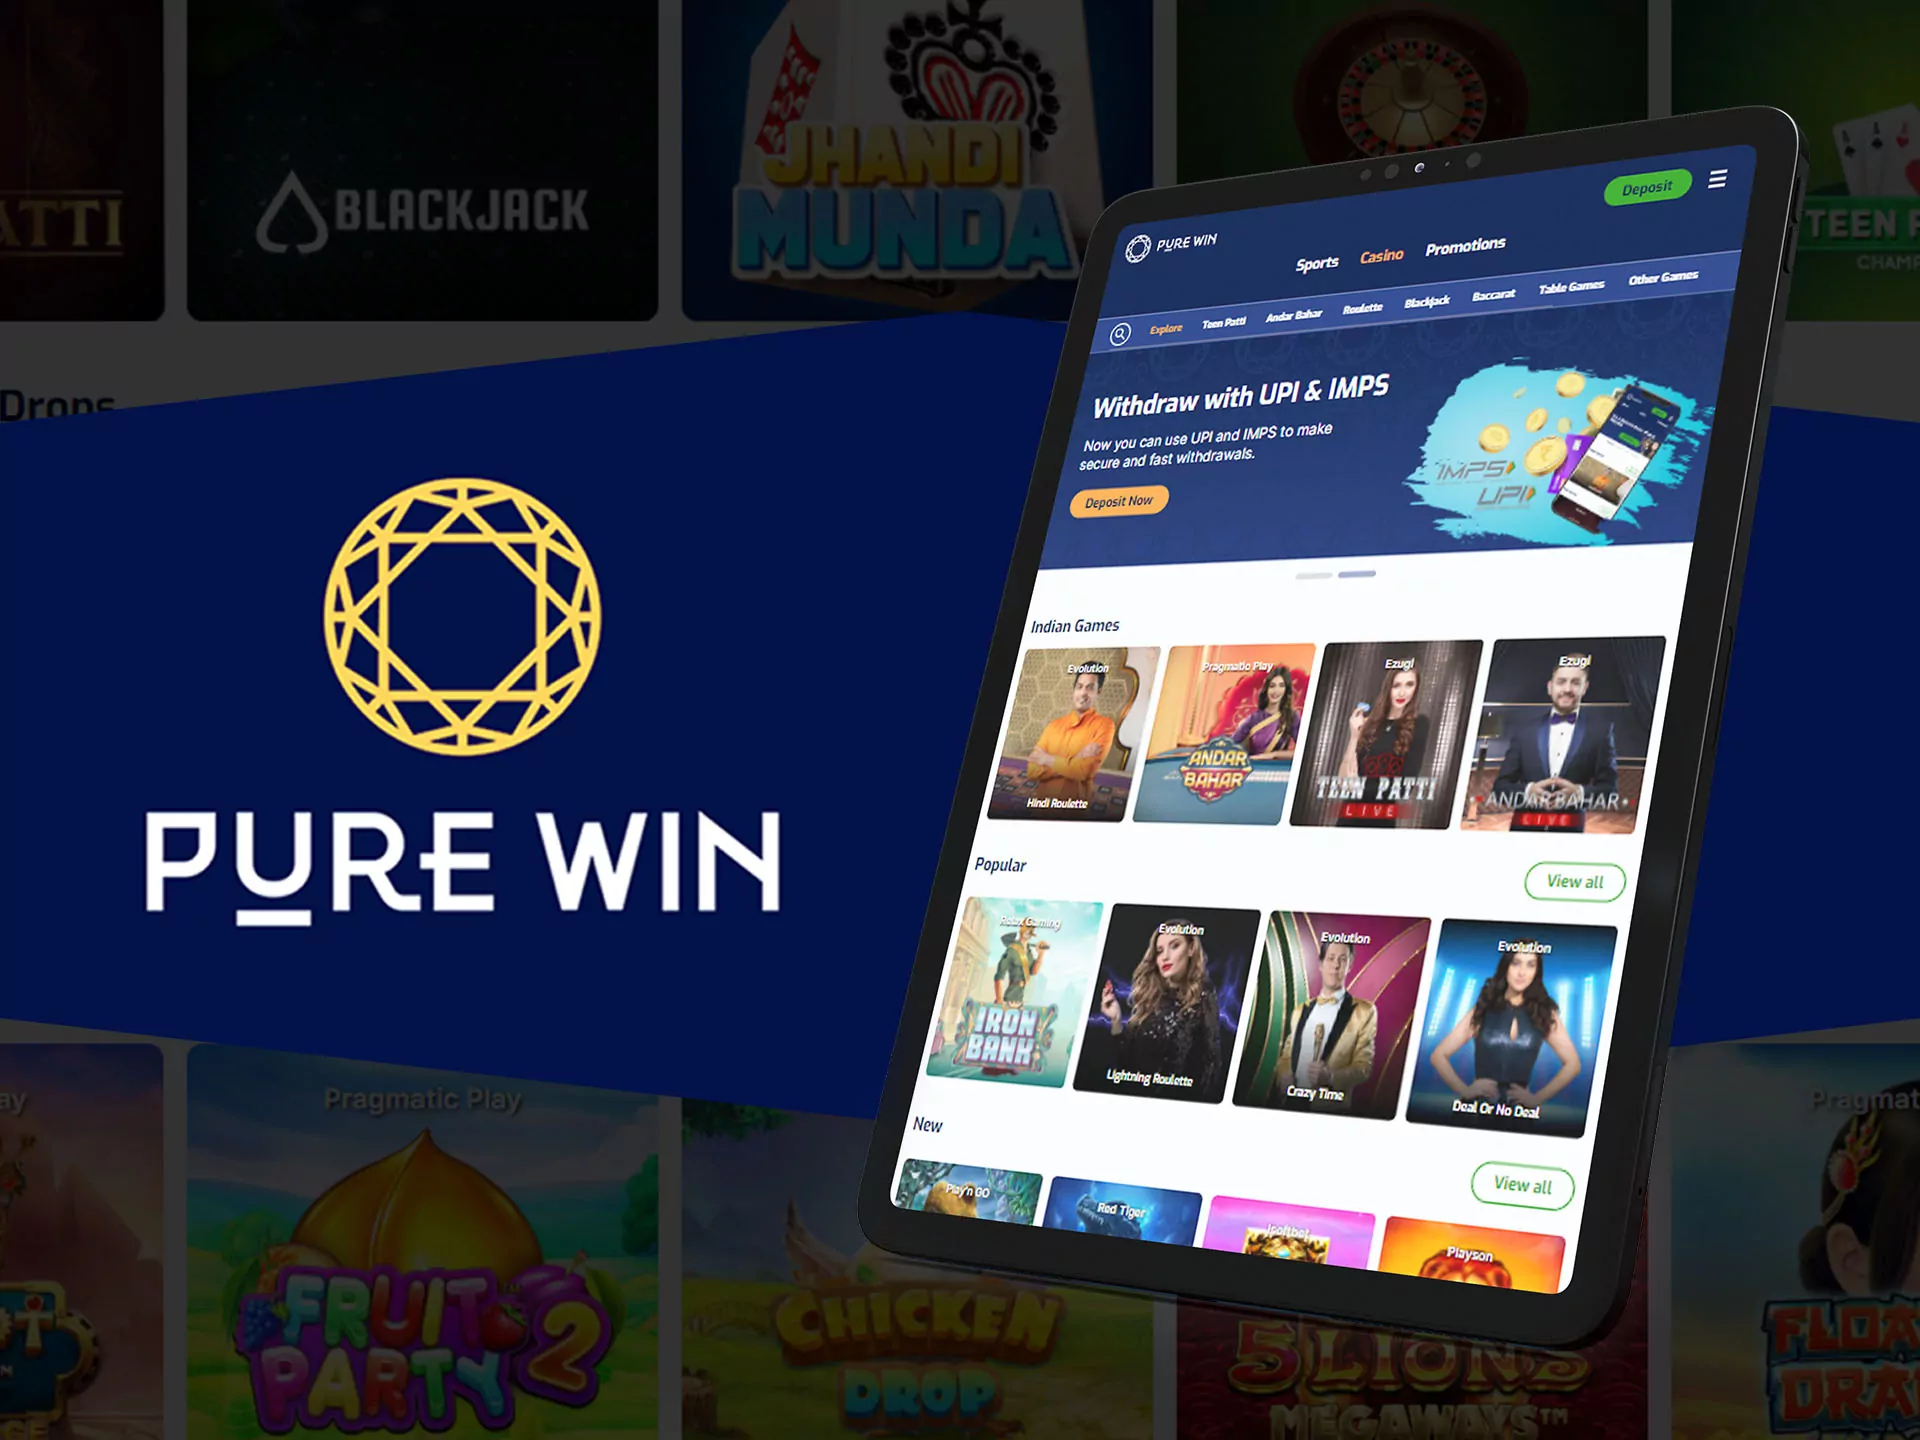 You can use Pure Win website on your phone.